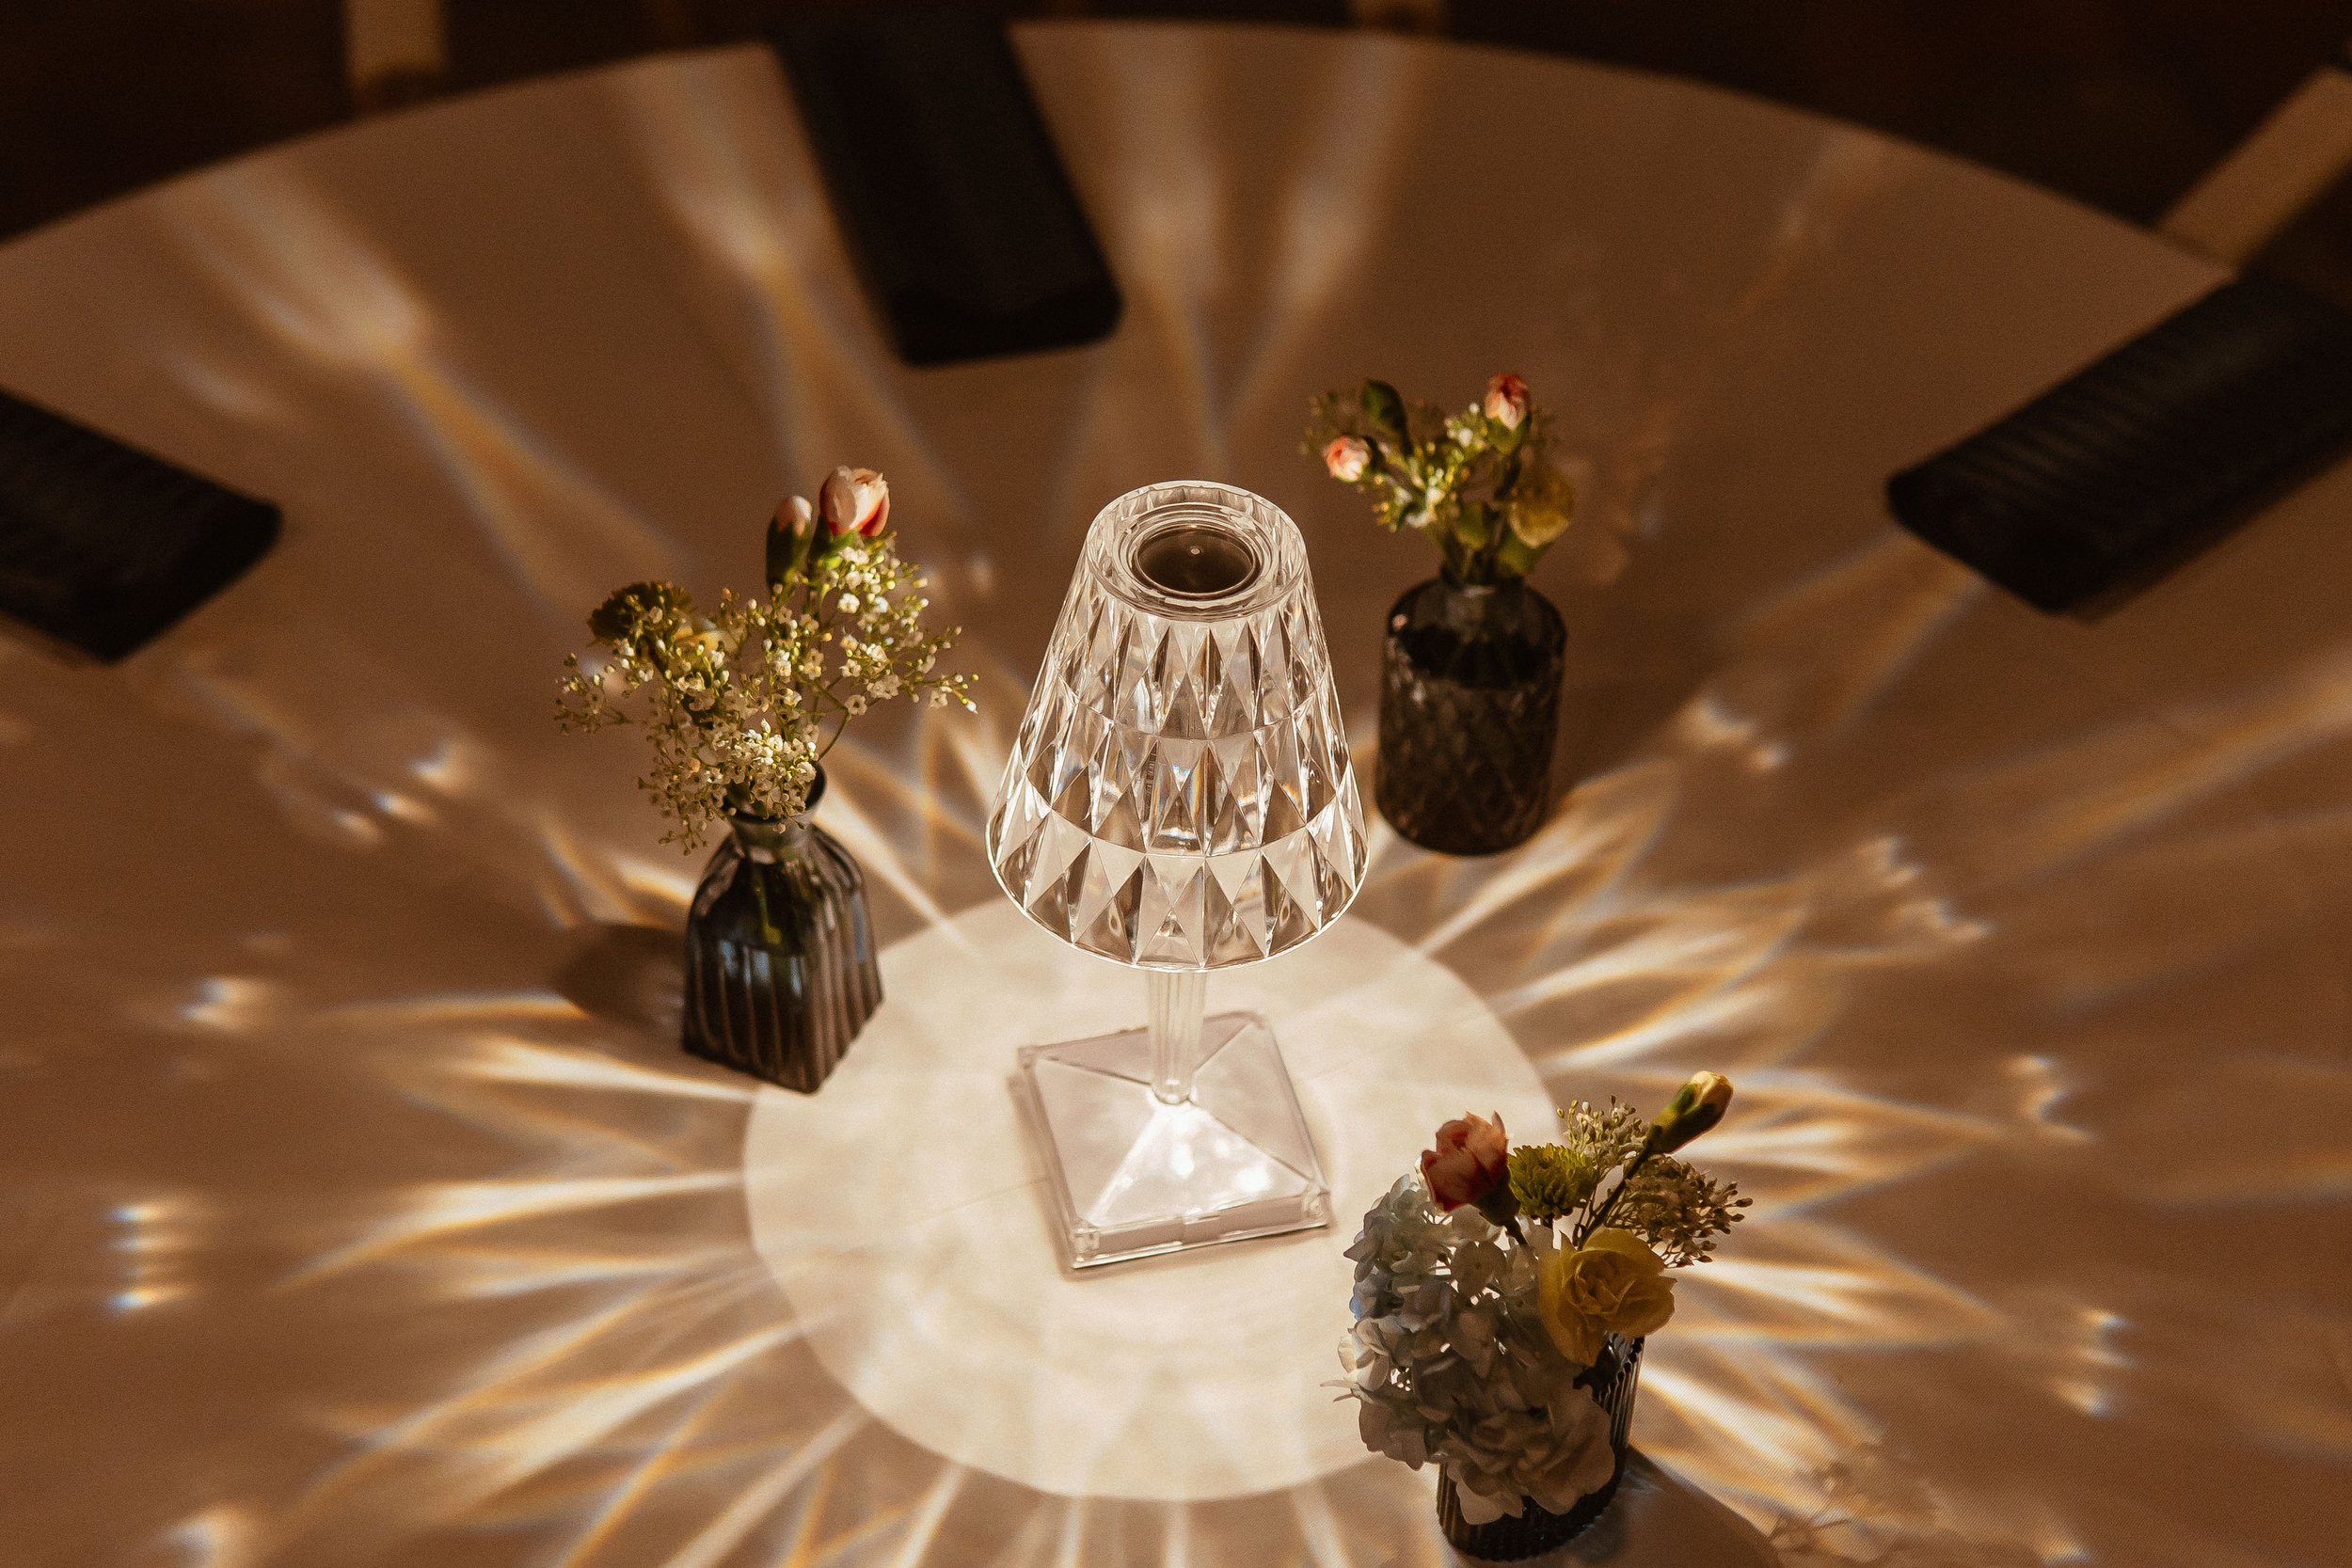 Small lighted glass lamp centerpiece